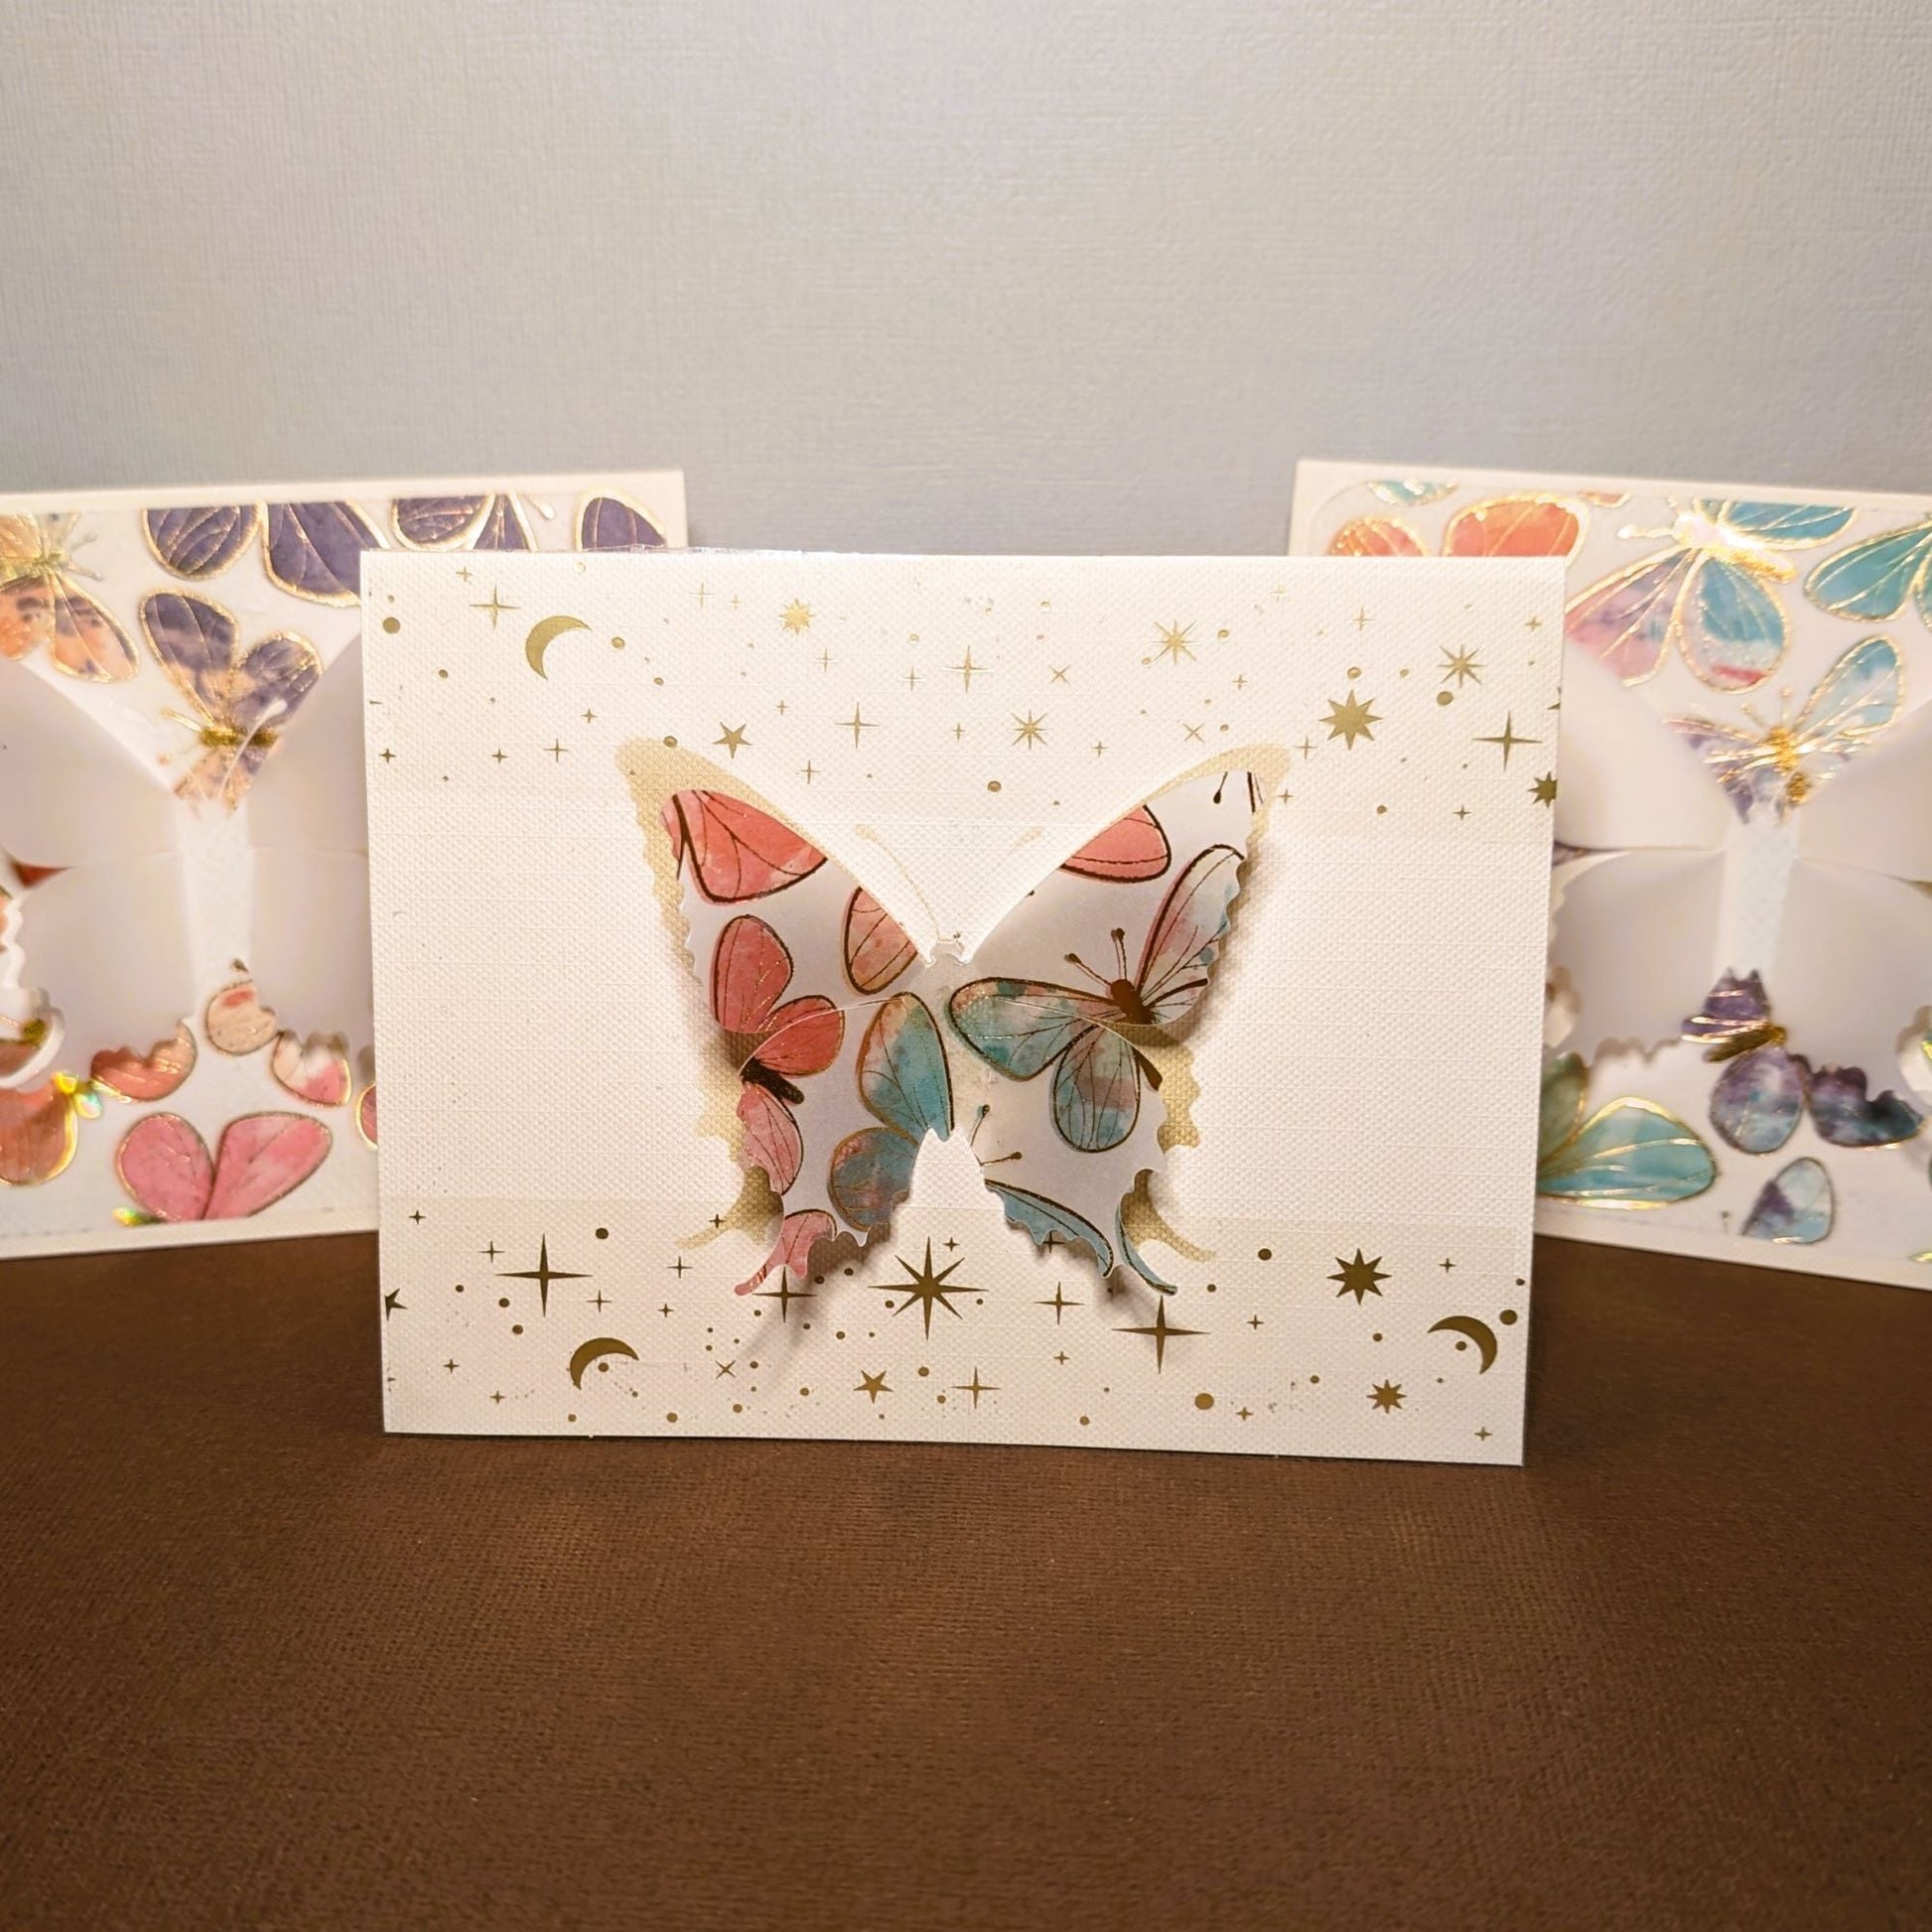 Butterflies Flutter By - Life's Special Moments - Handmade Greeting Card - 31 Rubies Designs